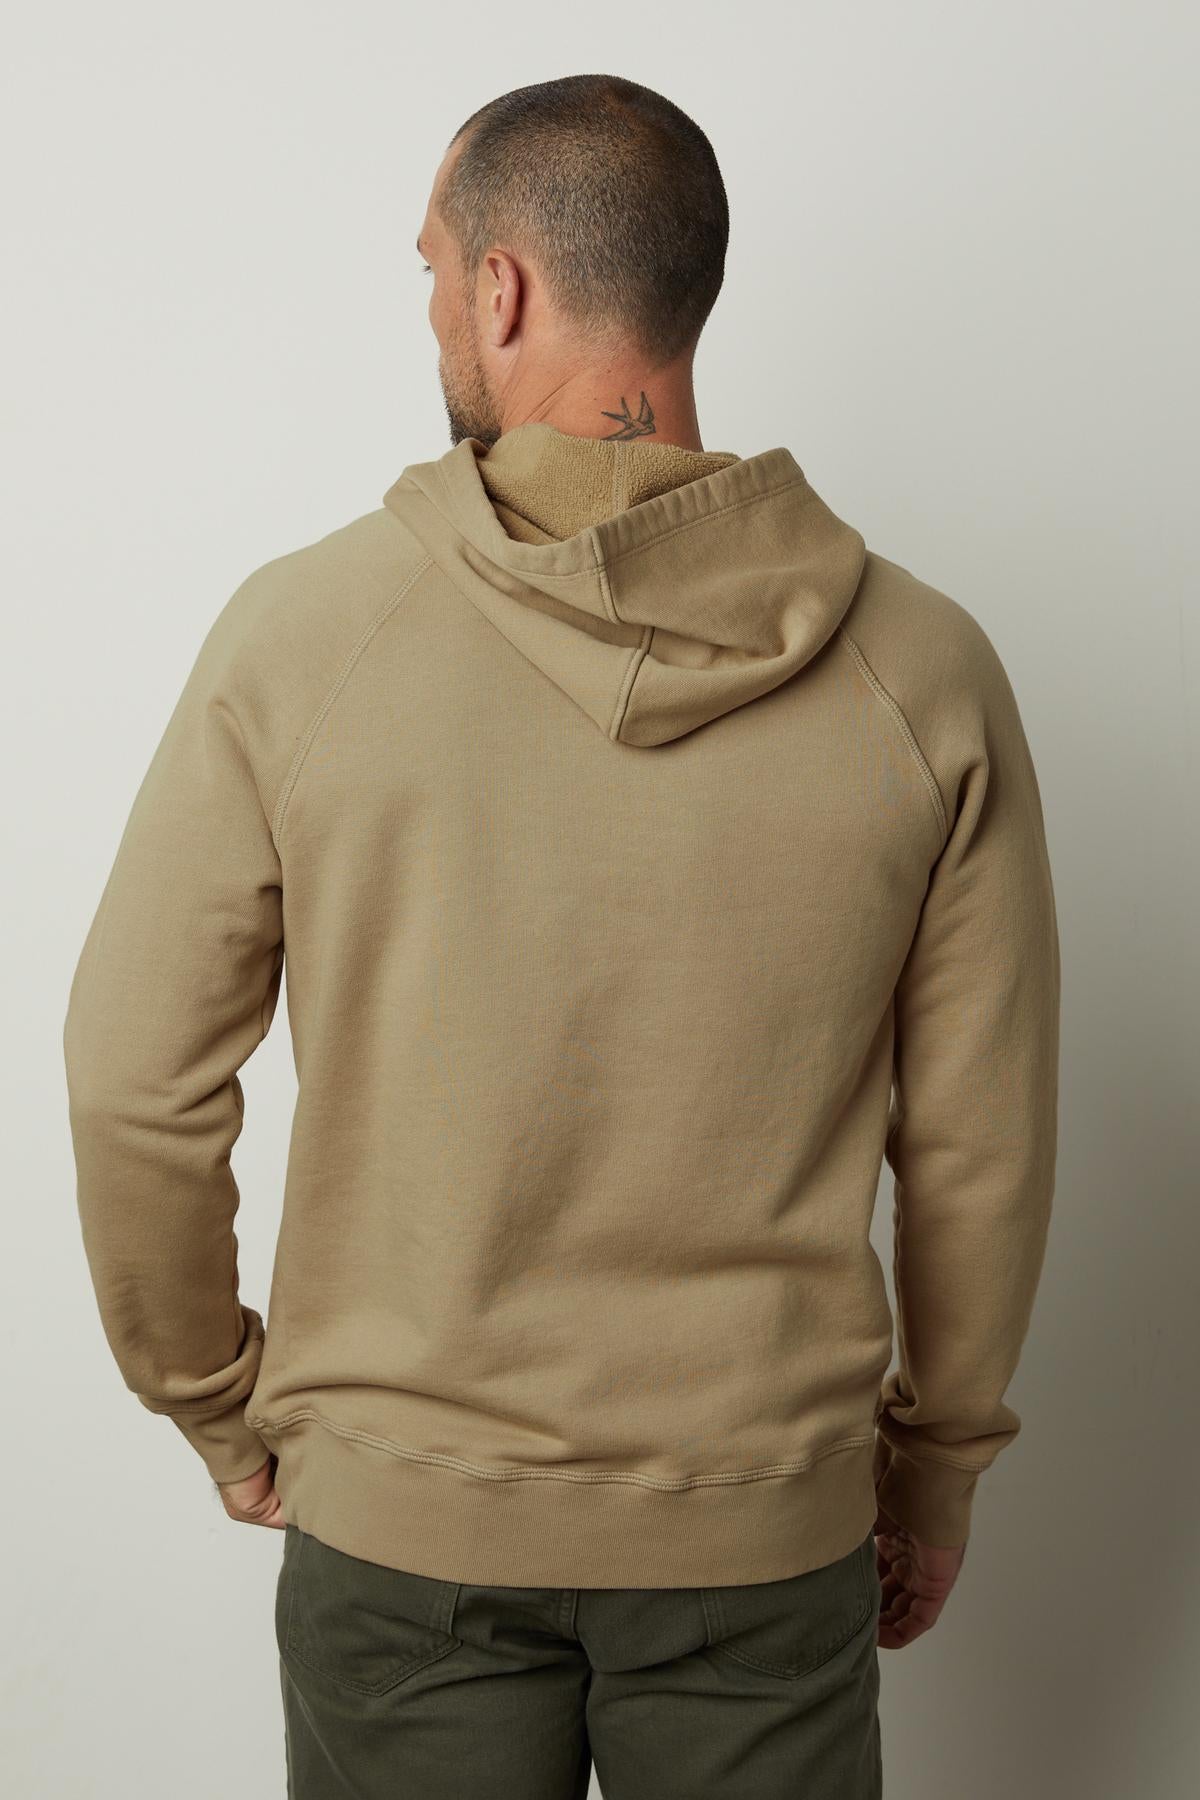 The back view of a man wearing a Velvet by Graham & Spencer HOPKIN PULLOVER HOODIE made with brushed fleece for comfort.-35547534065857